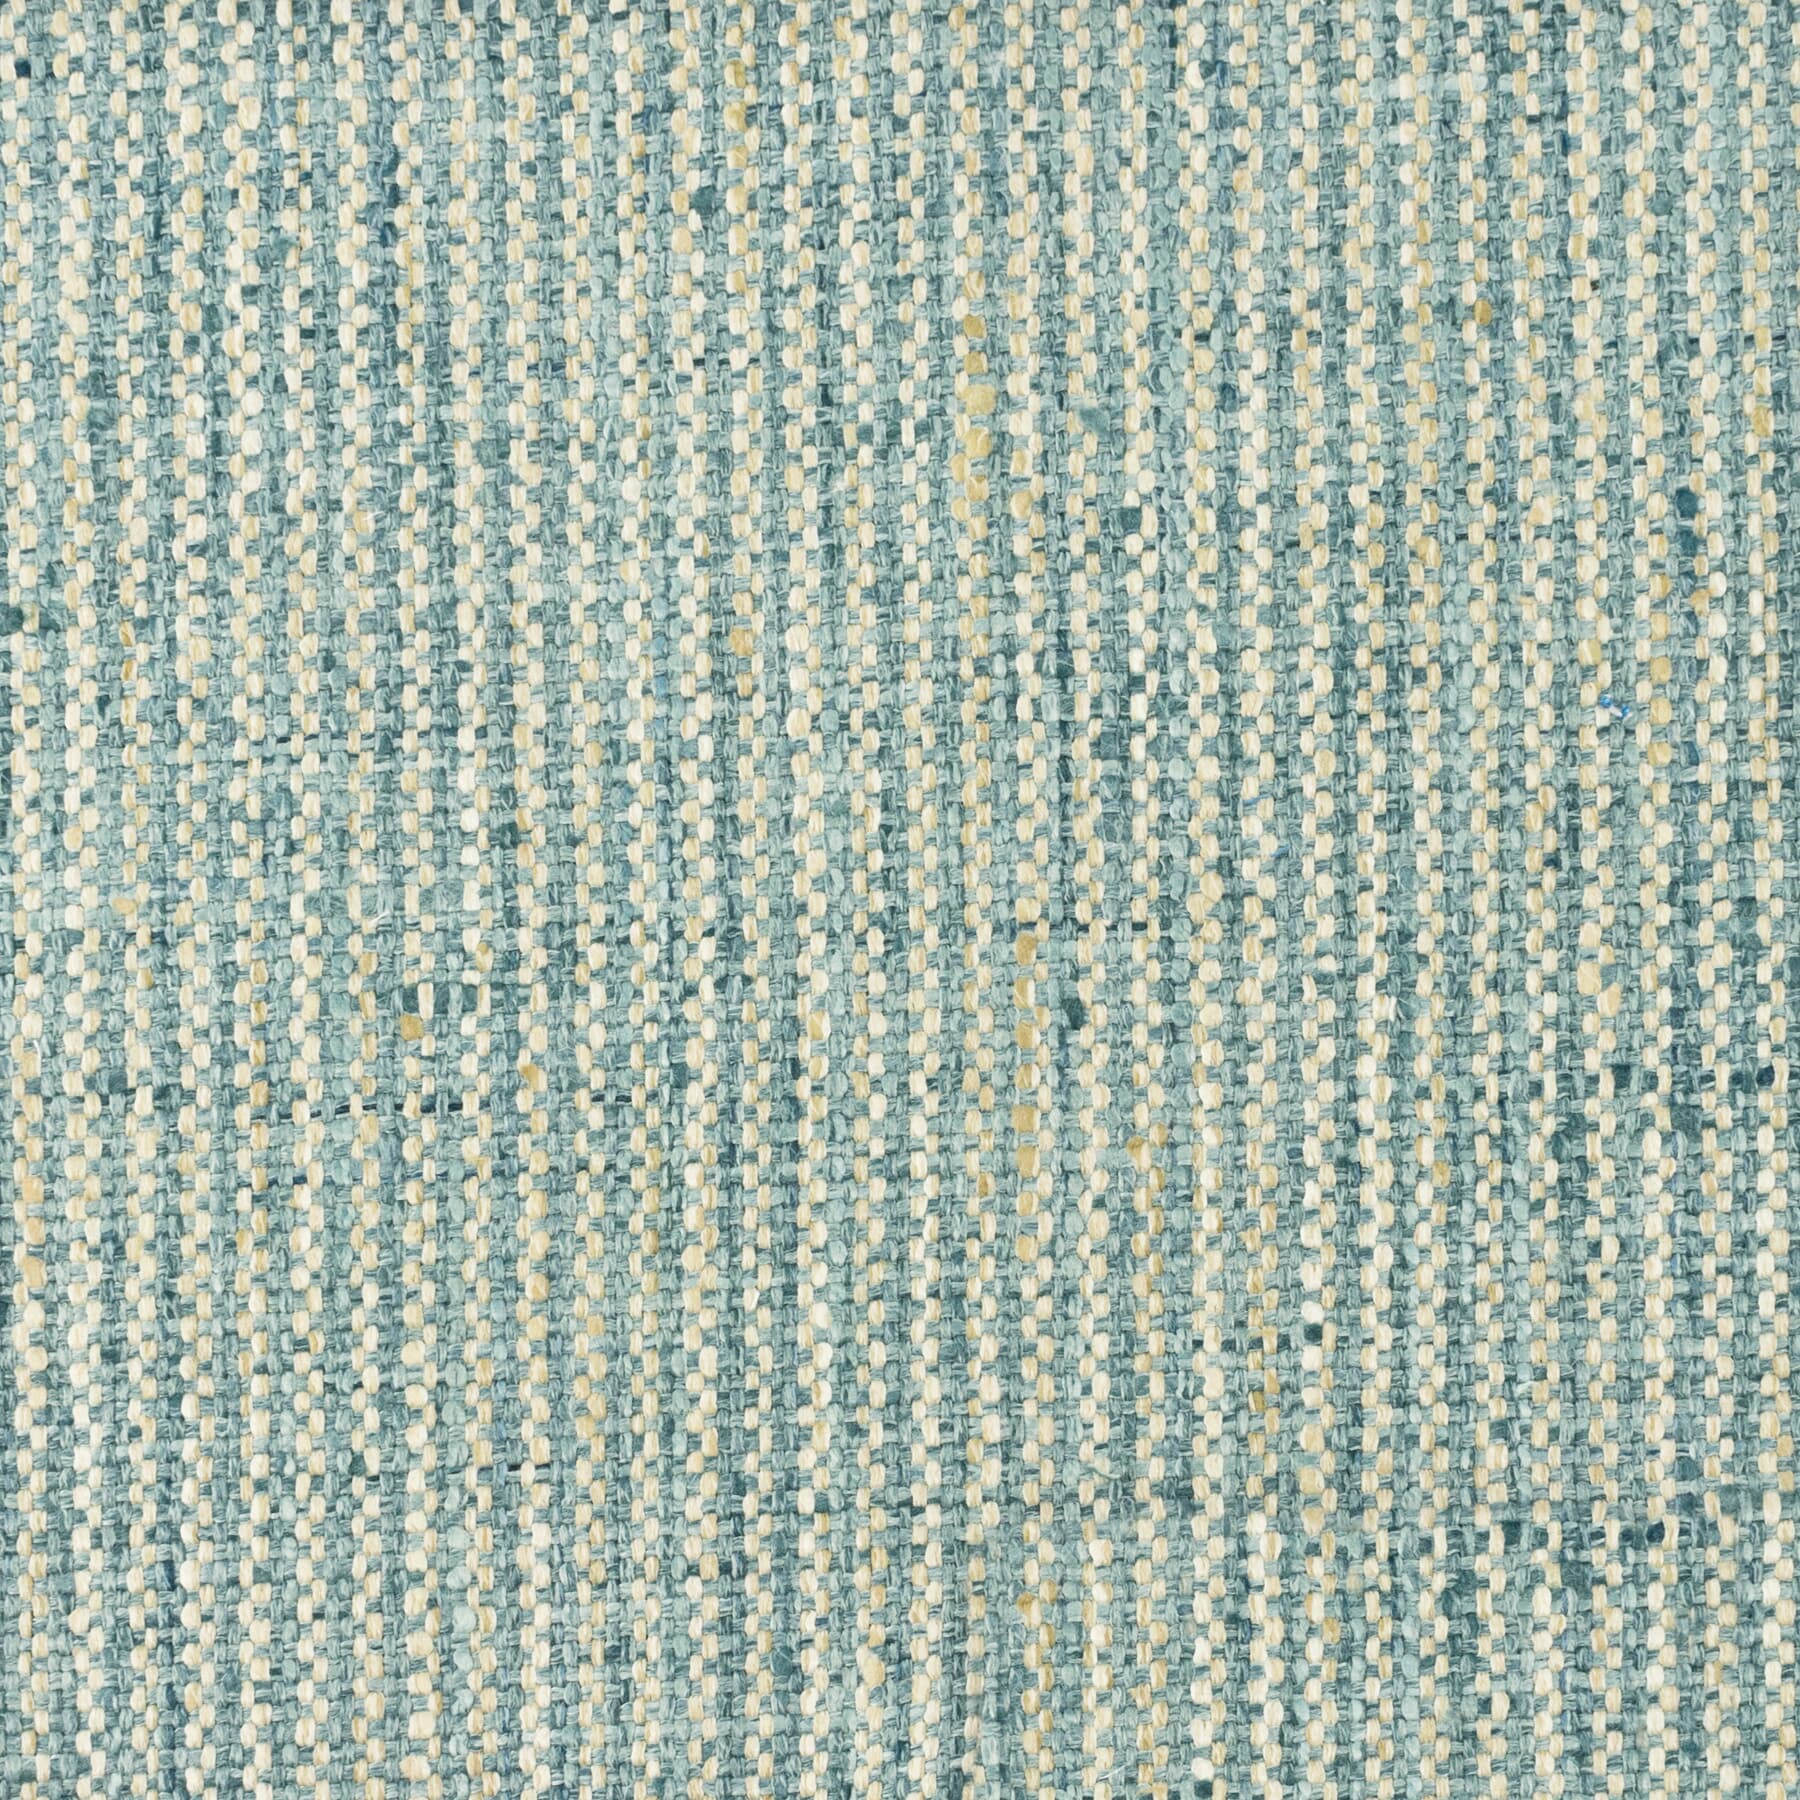 Sachet 1 Teal by Stout Fabric